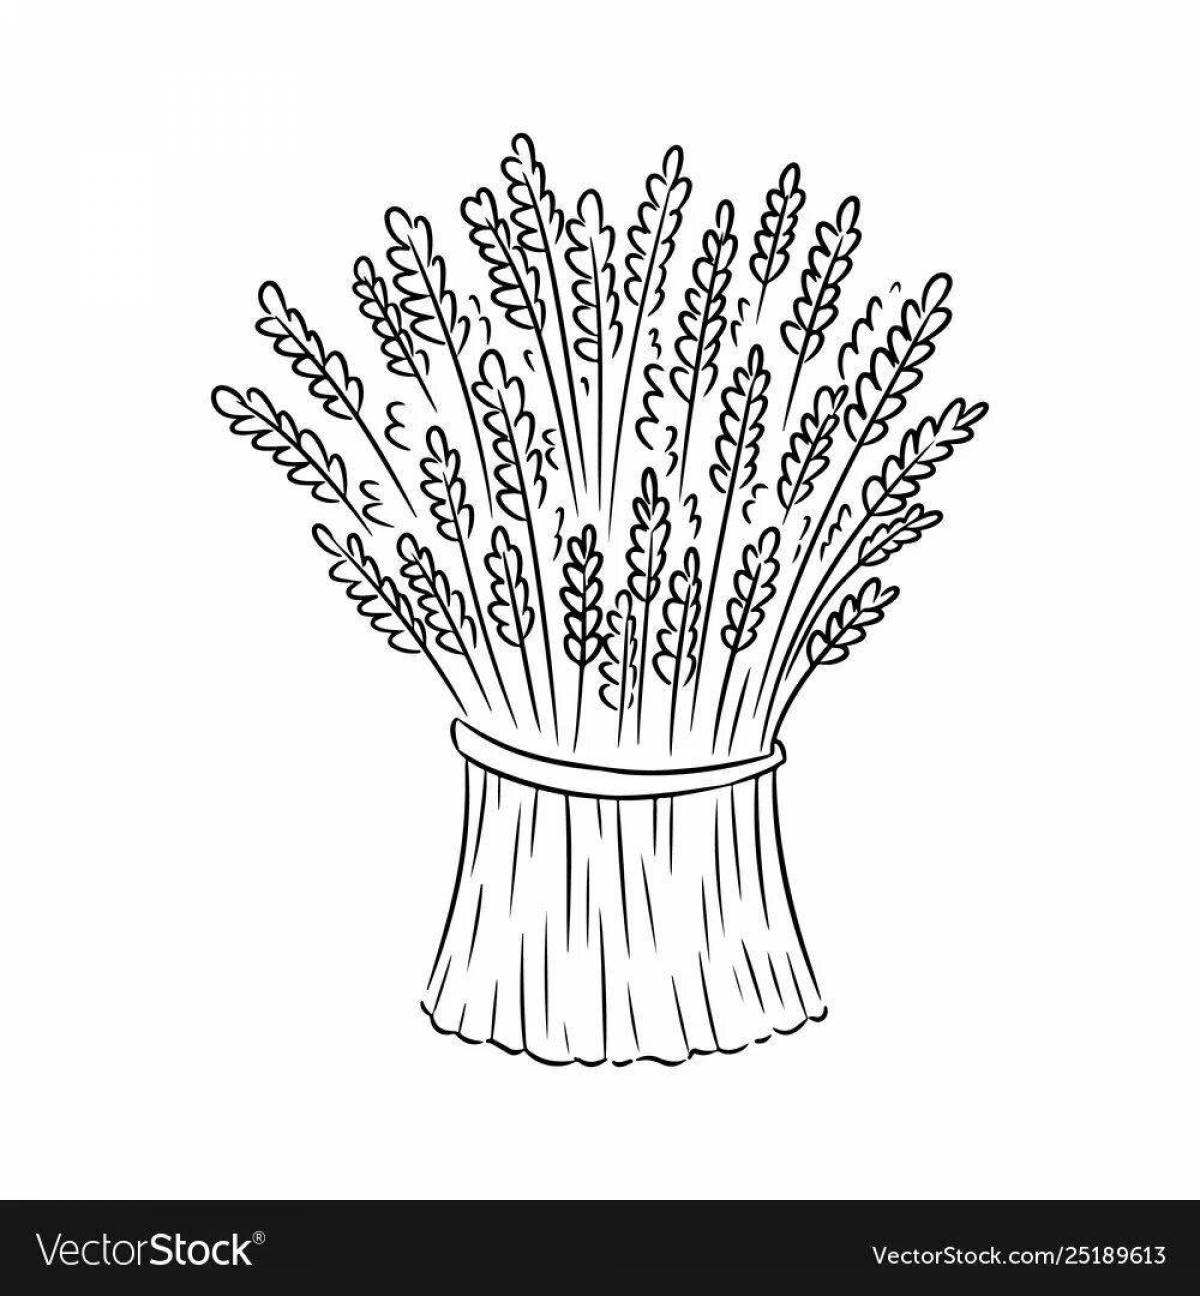 Fun hay coloring for toddlers